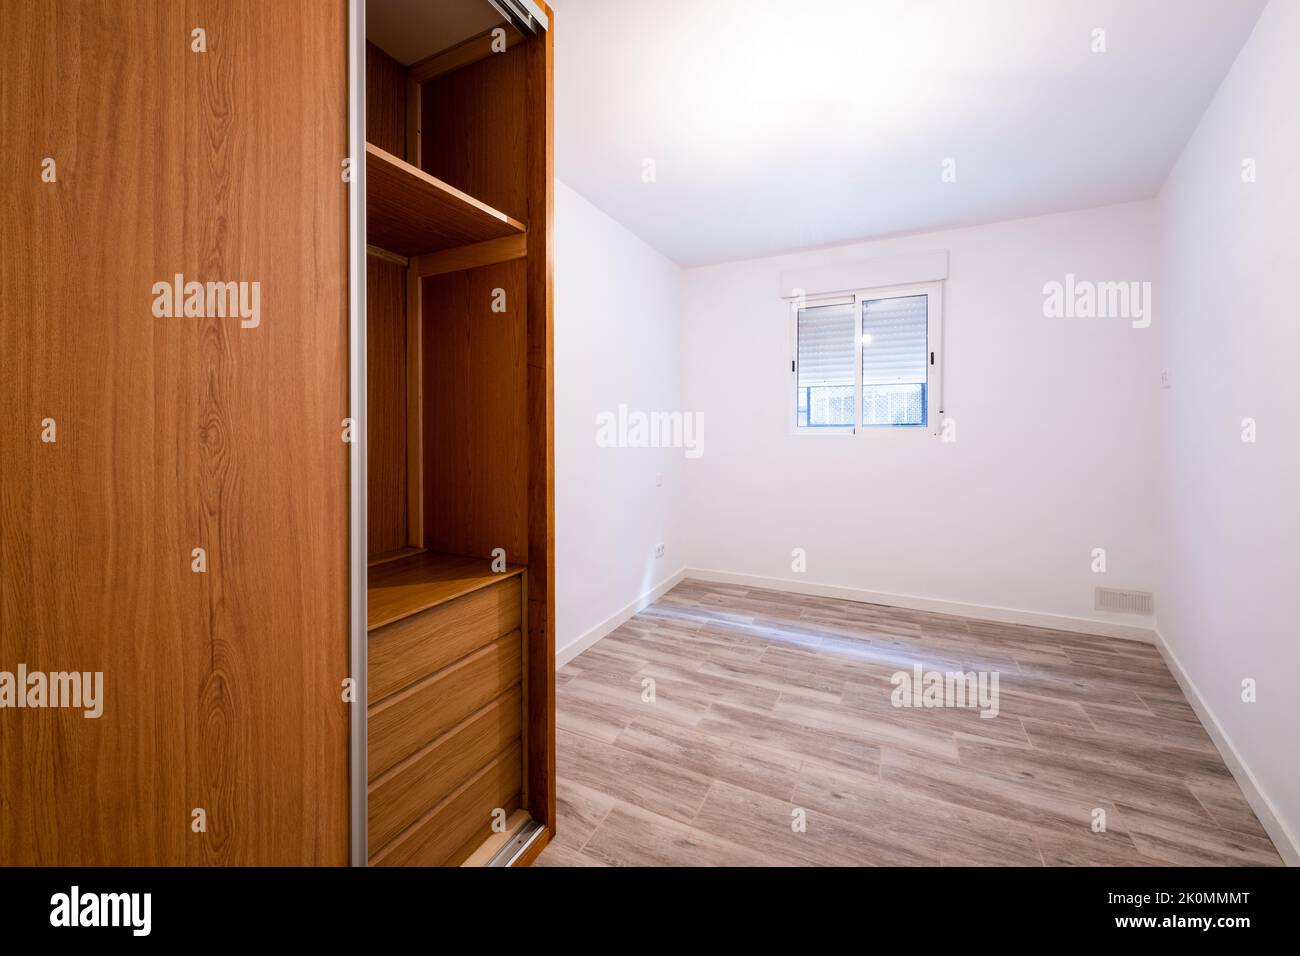 Renovated room with built-in wardrobe with sliding doors in cherry wood color, interior chest of drawers, white aluminum window and aluminum radiator Stock Photo